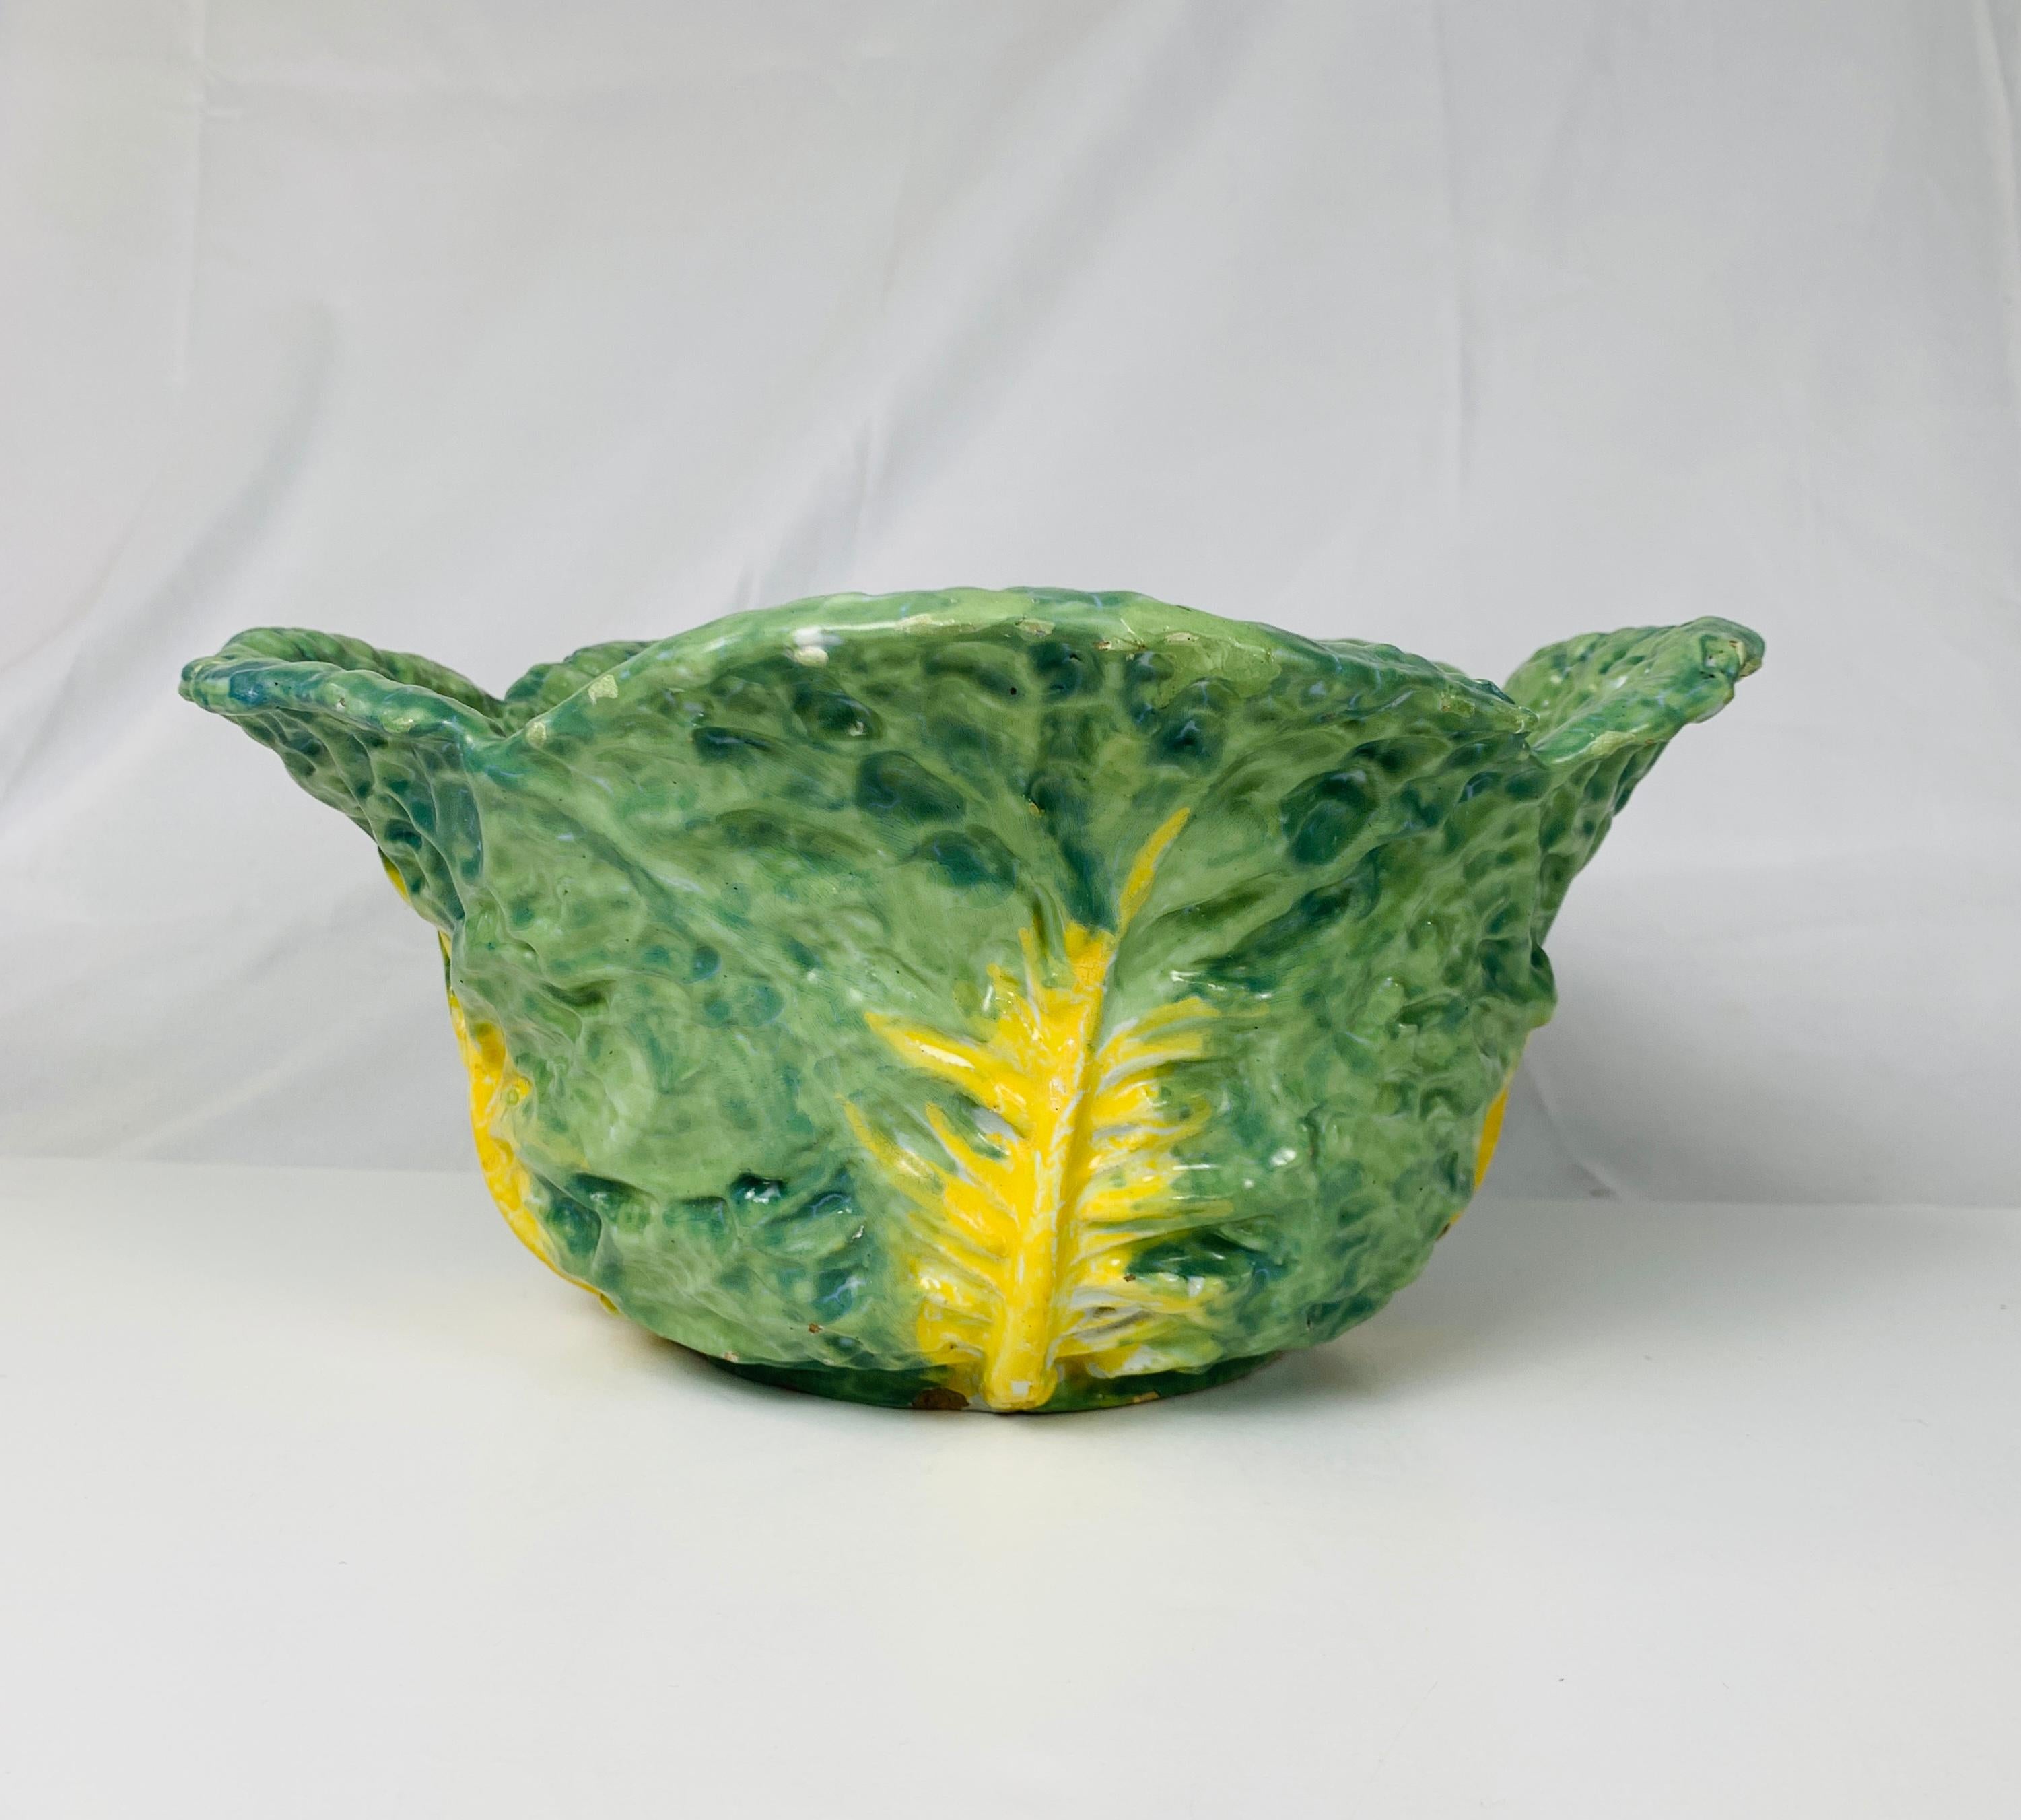 Rococo Antique Faience Cabbage Form Soup Tureen Hand-Painted in Brussels Circa 1765 For Sale